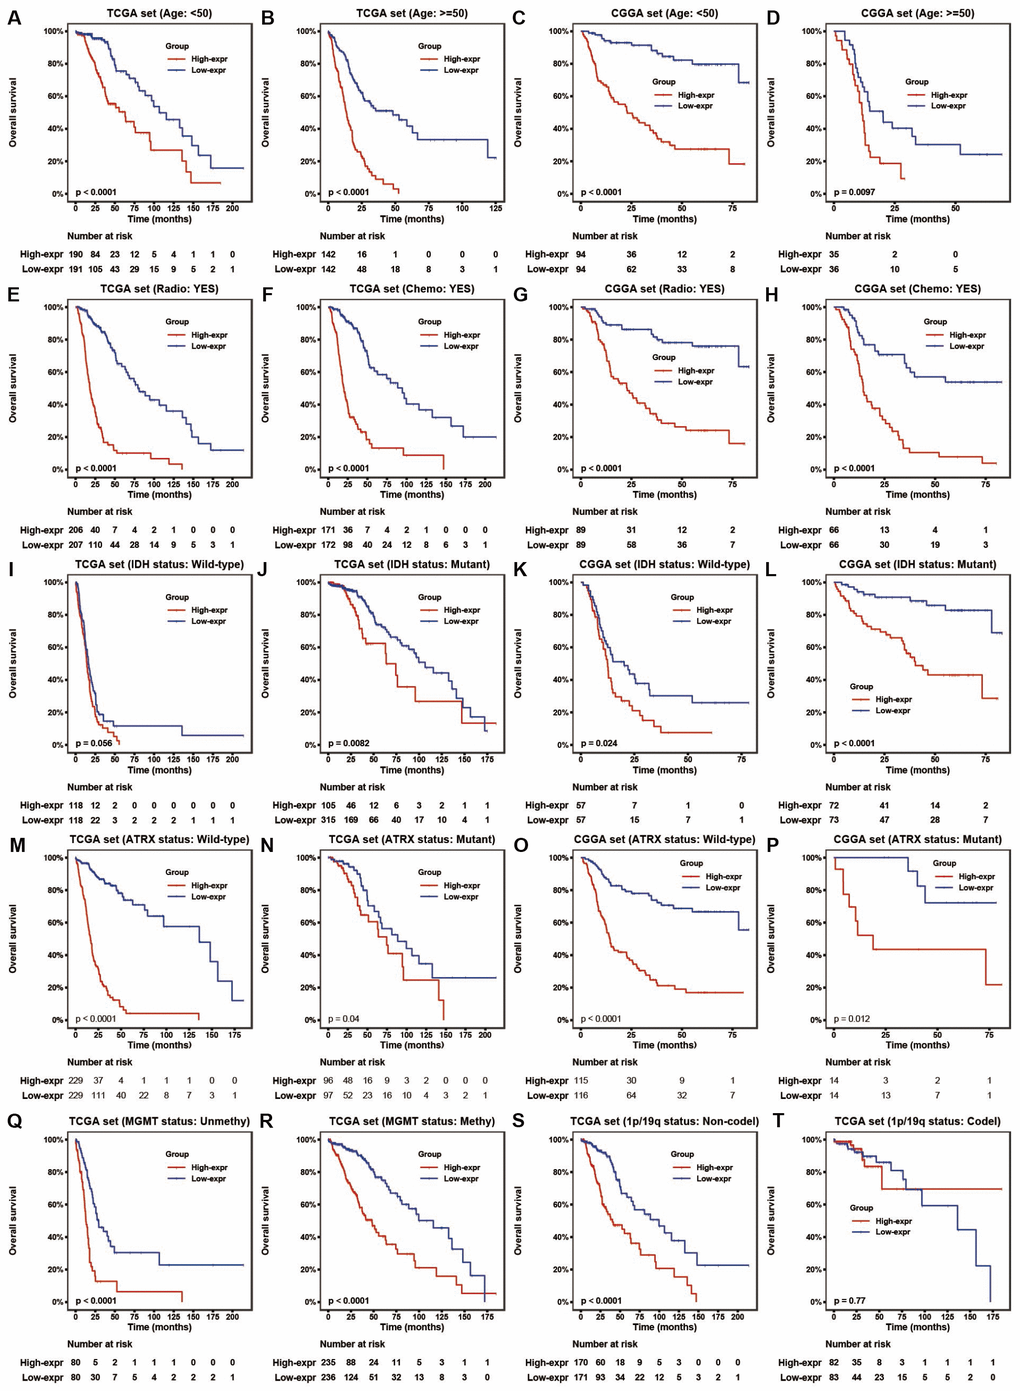 HOTAIRM1 maintains high prognostic value in stratified groups. (A–T) Prognostic value of HOTAIRM1 in TCGA and CGGA cohorts stratified by clinical (A–H) and genomic (I–T) features.